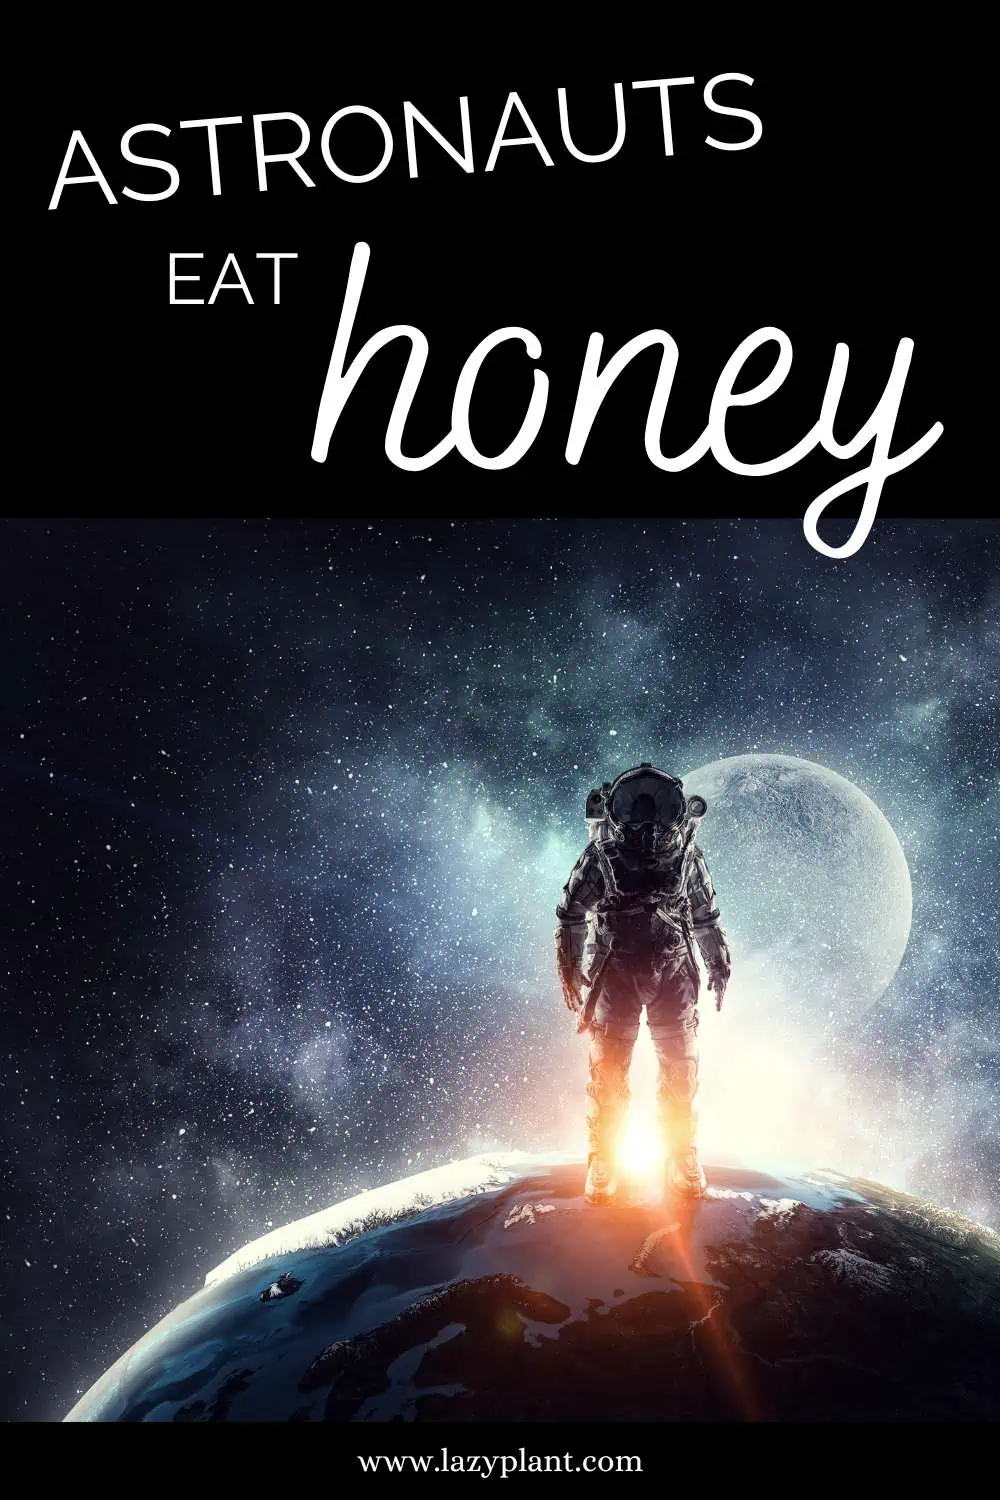 Astronauts eat Honey due to its long shelf life and superior nutritional value!